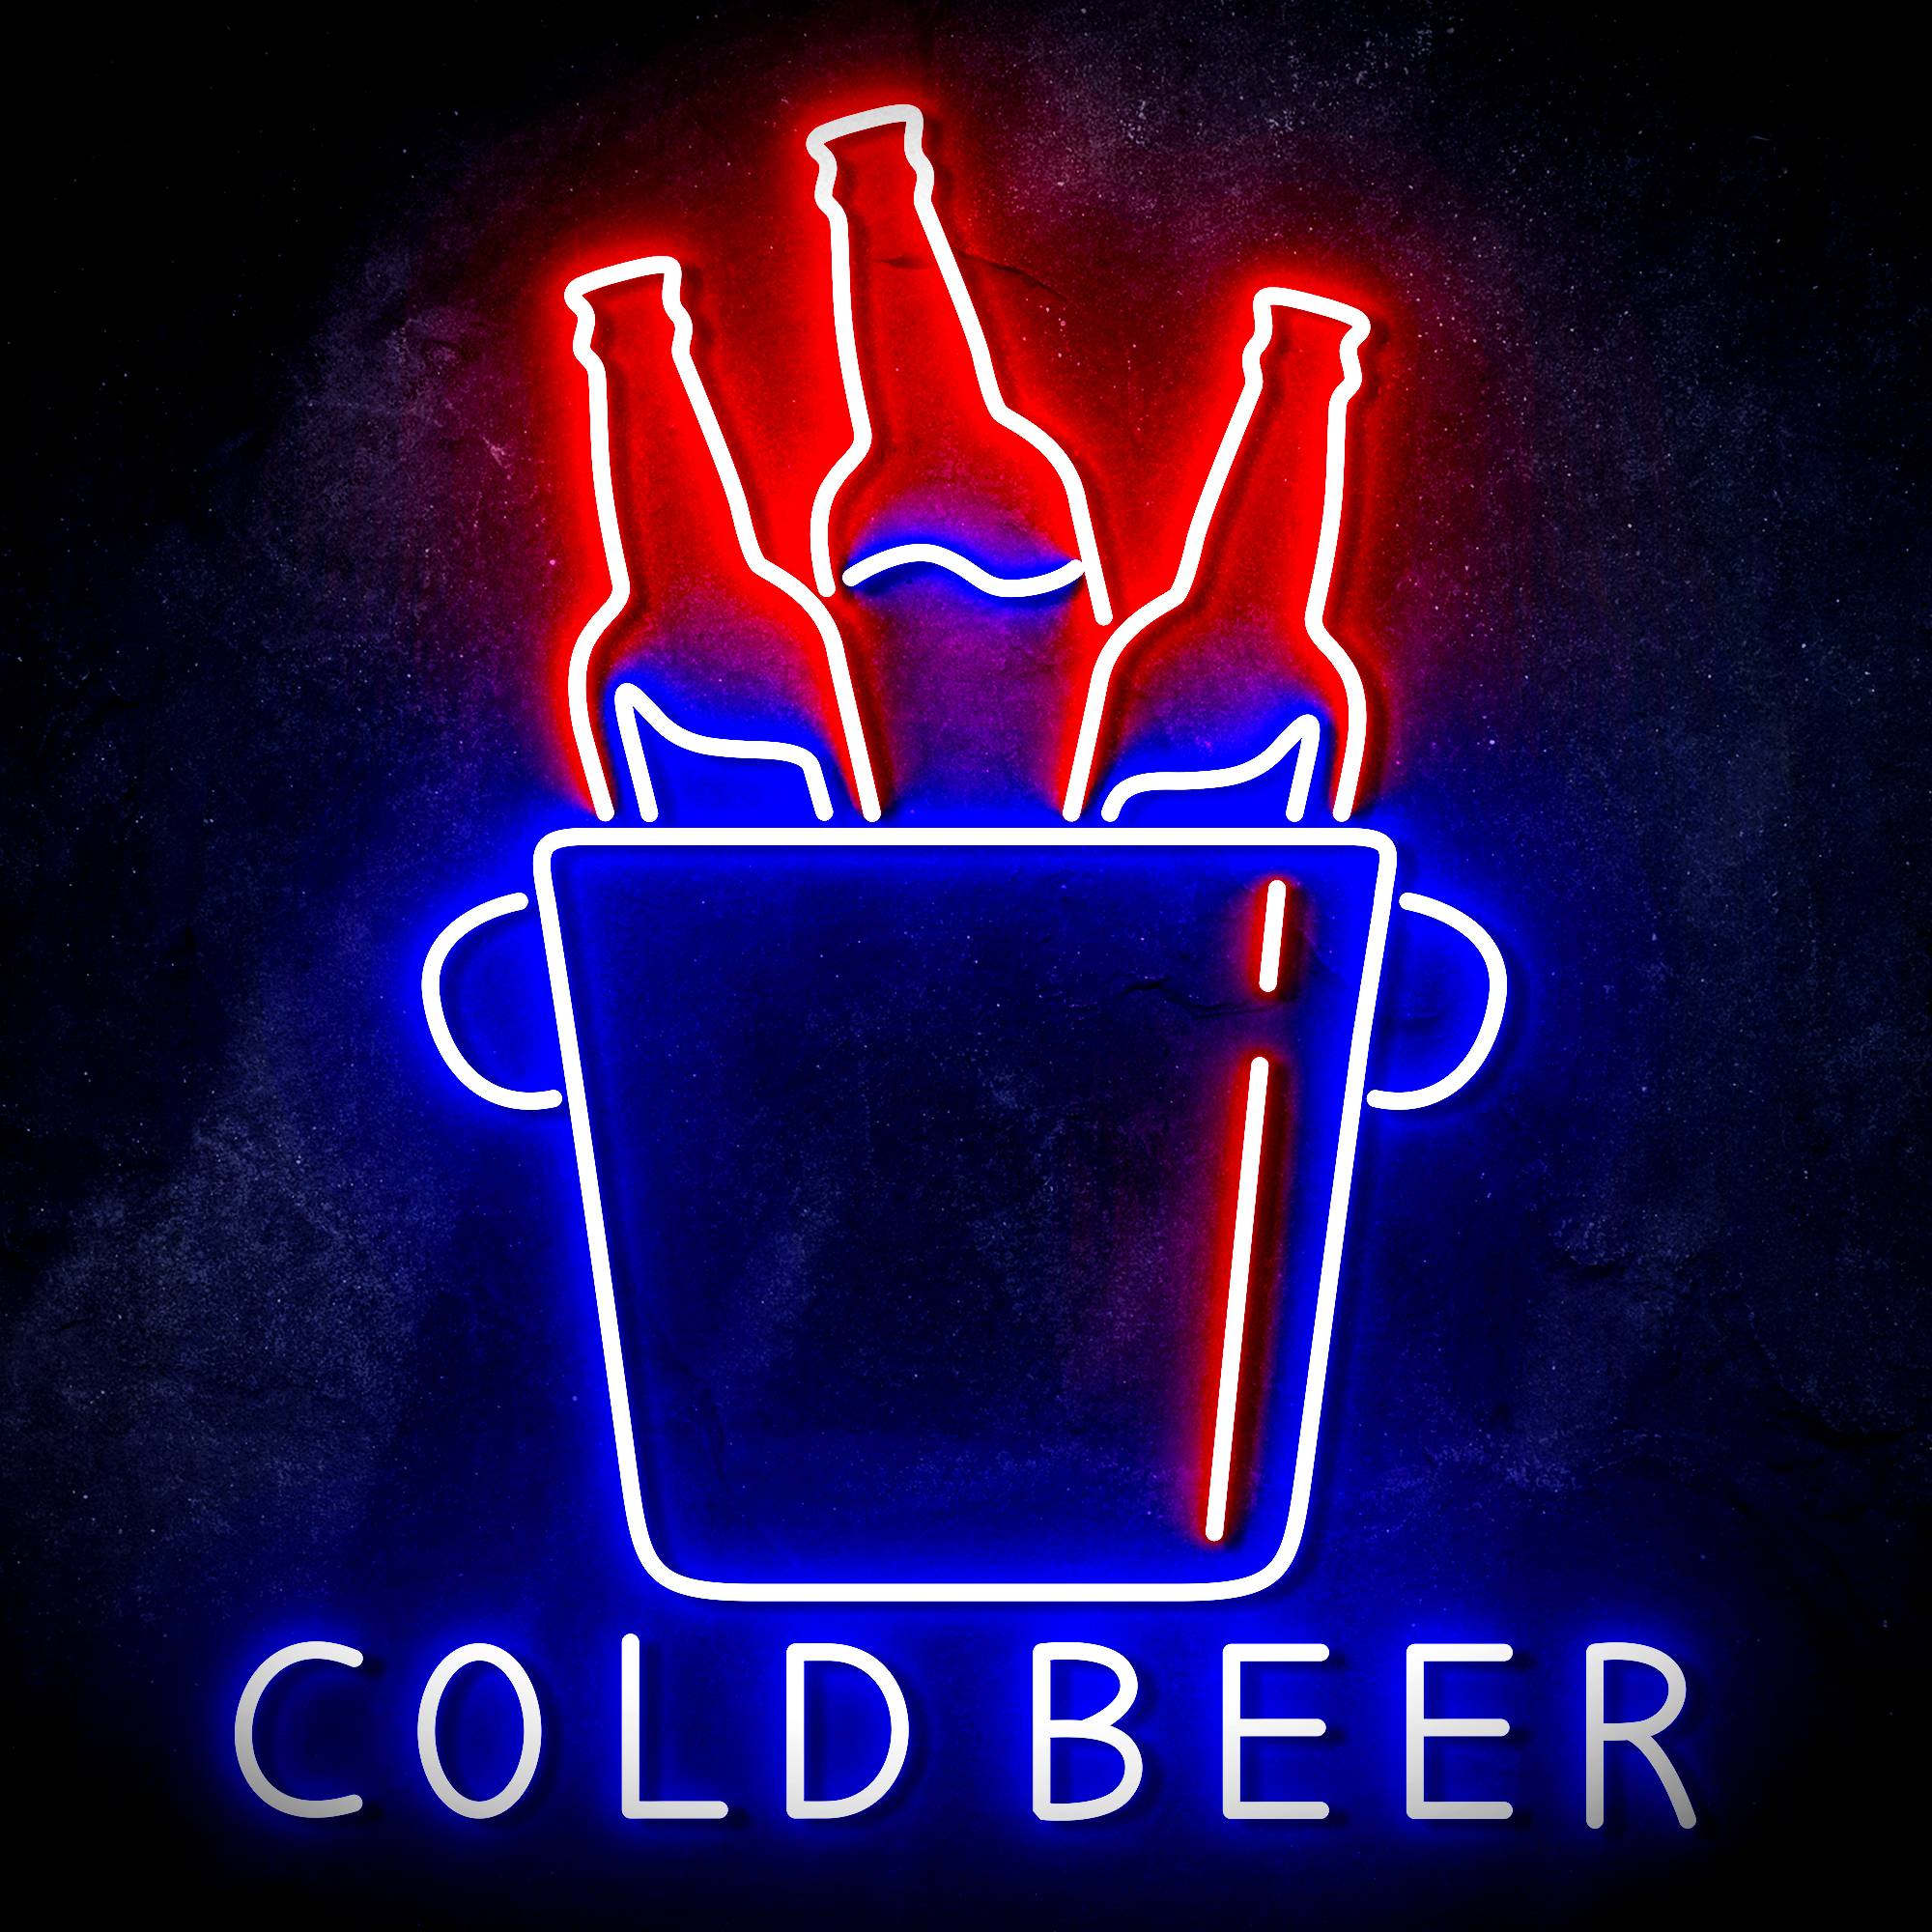 Cold Beer with Bucket of Beers LED Neon Sign